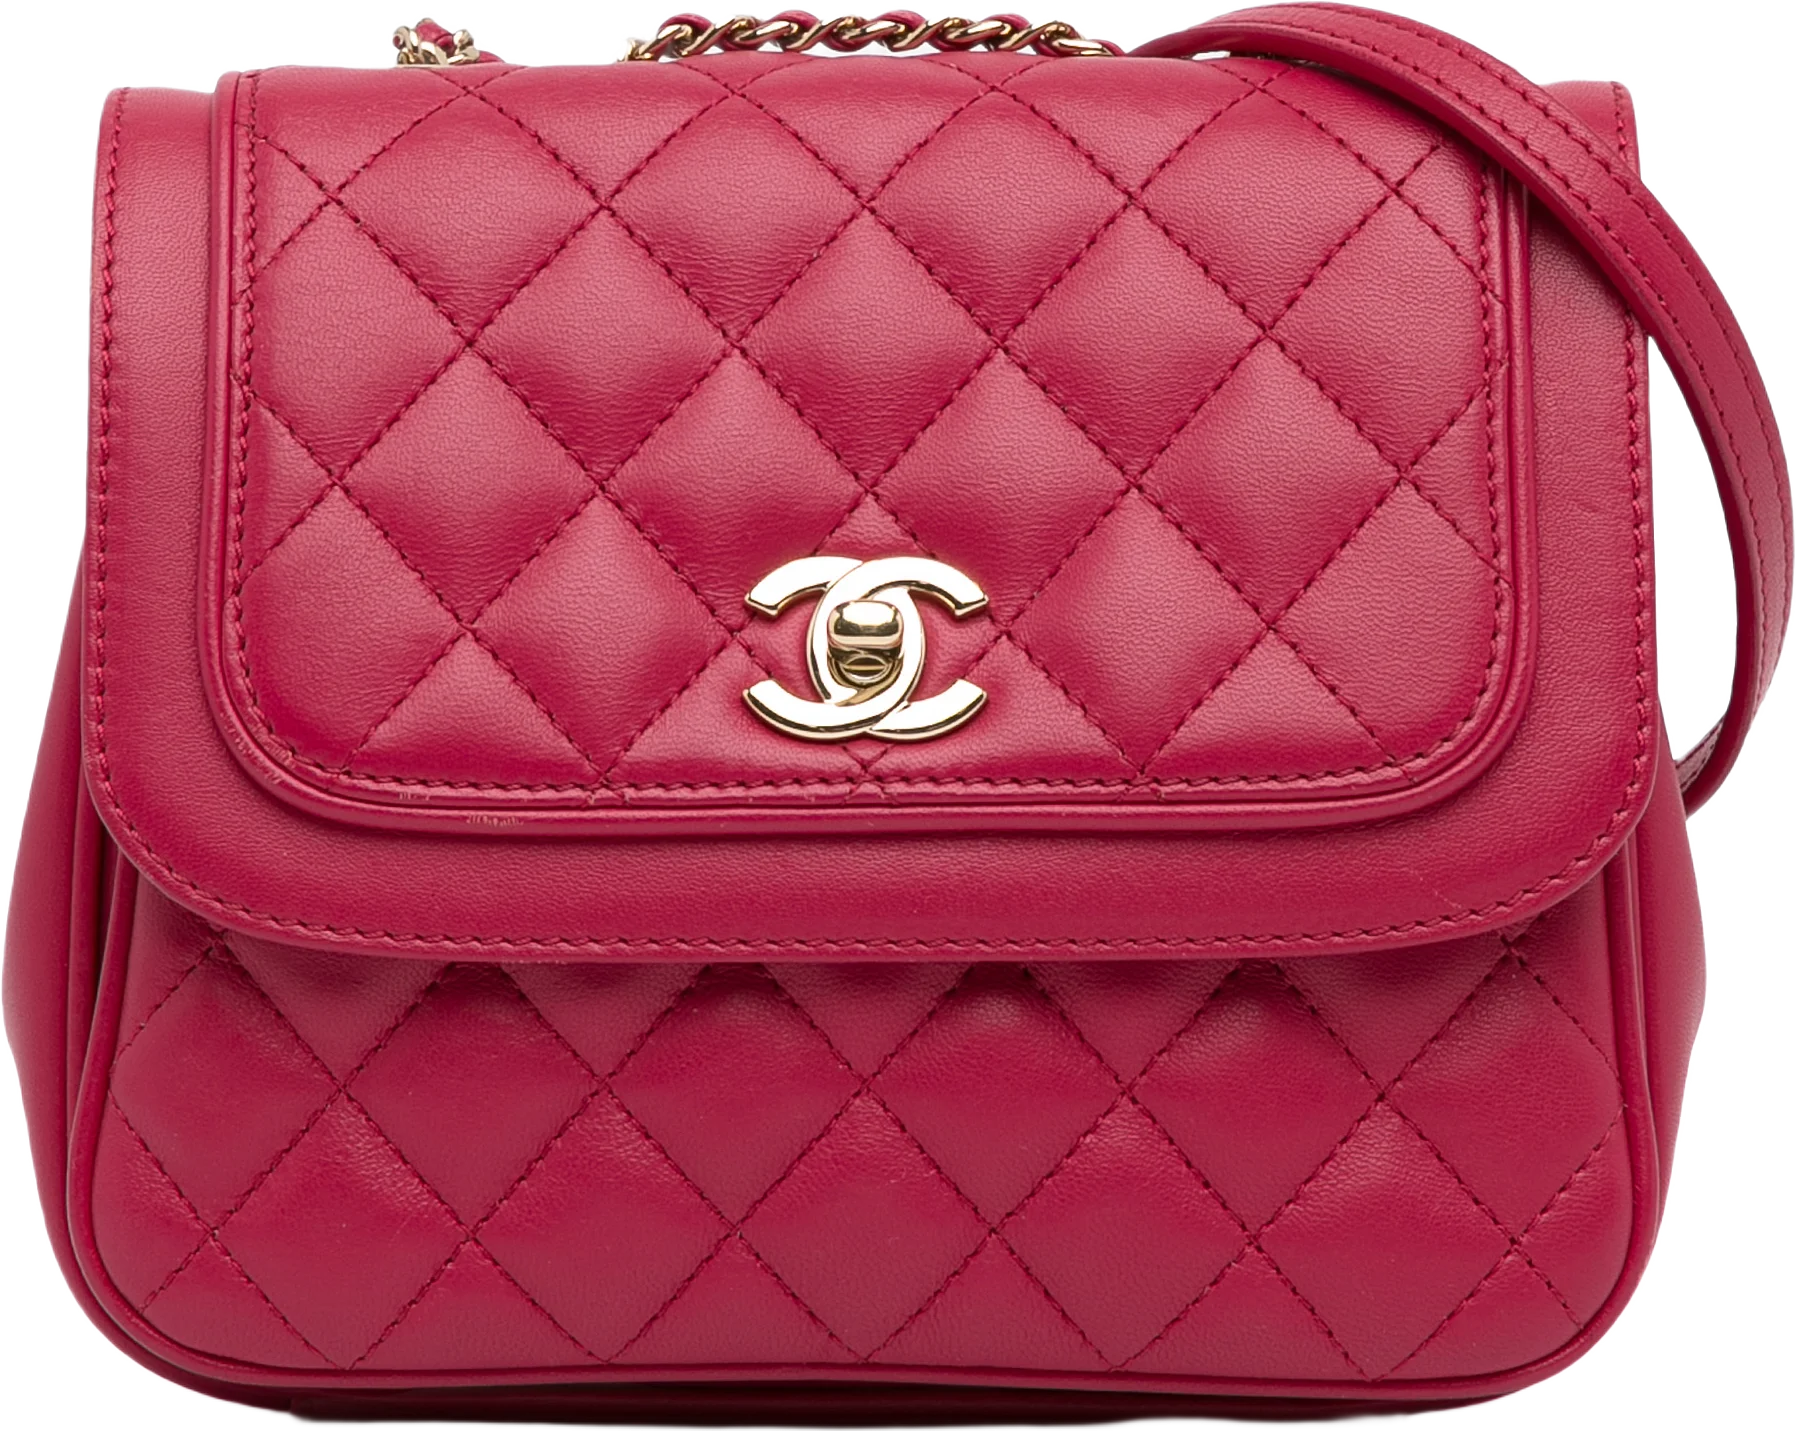 Chanel Small Lambskin Lovely Day Flap